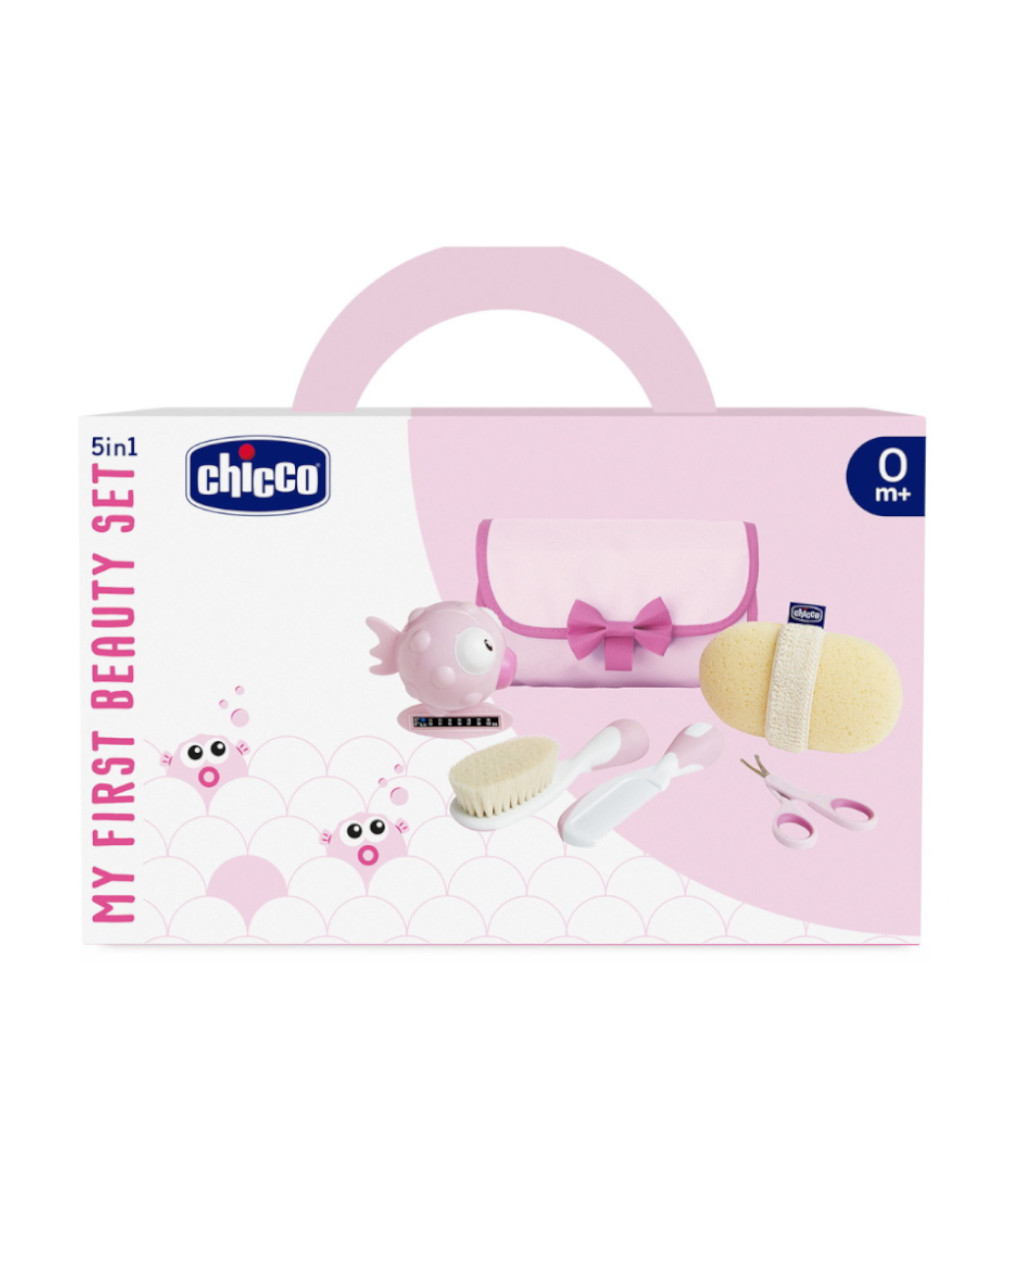 Set igiene 5in1 My First Beauty rosa 0m+ - chicco - Prénatal